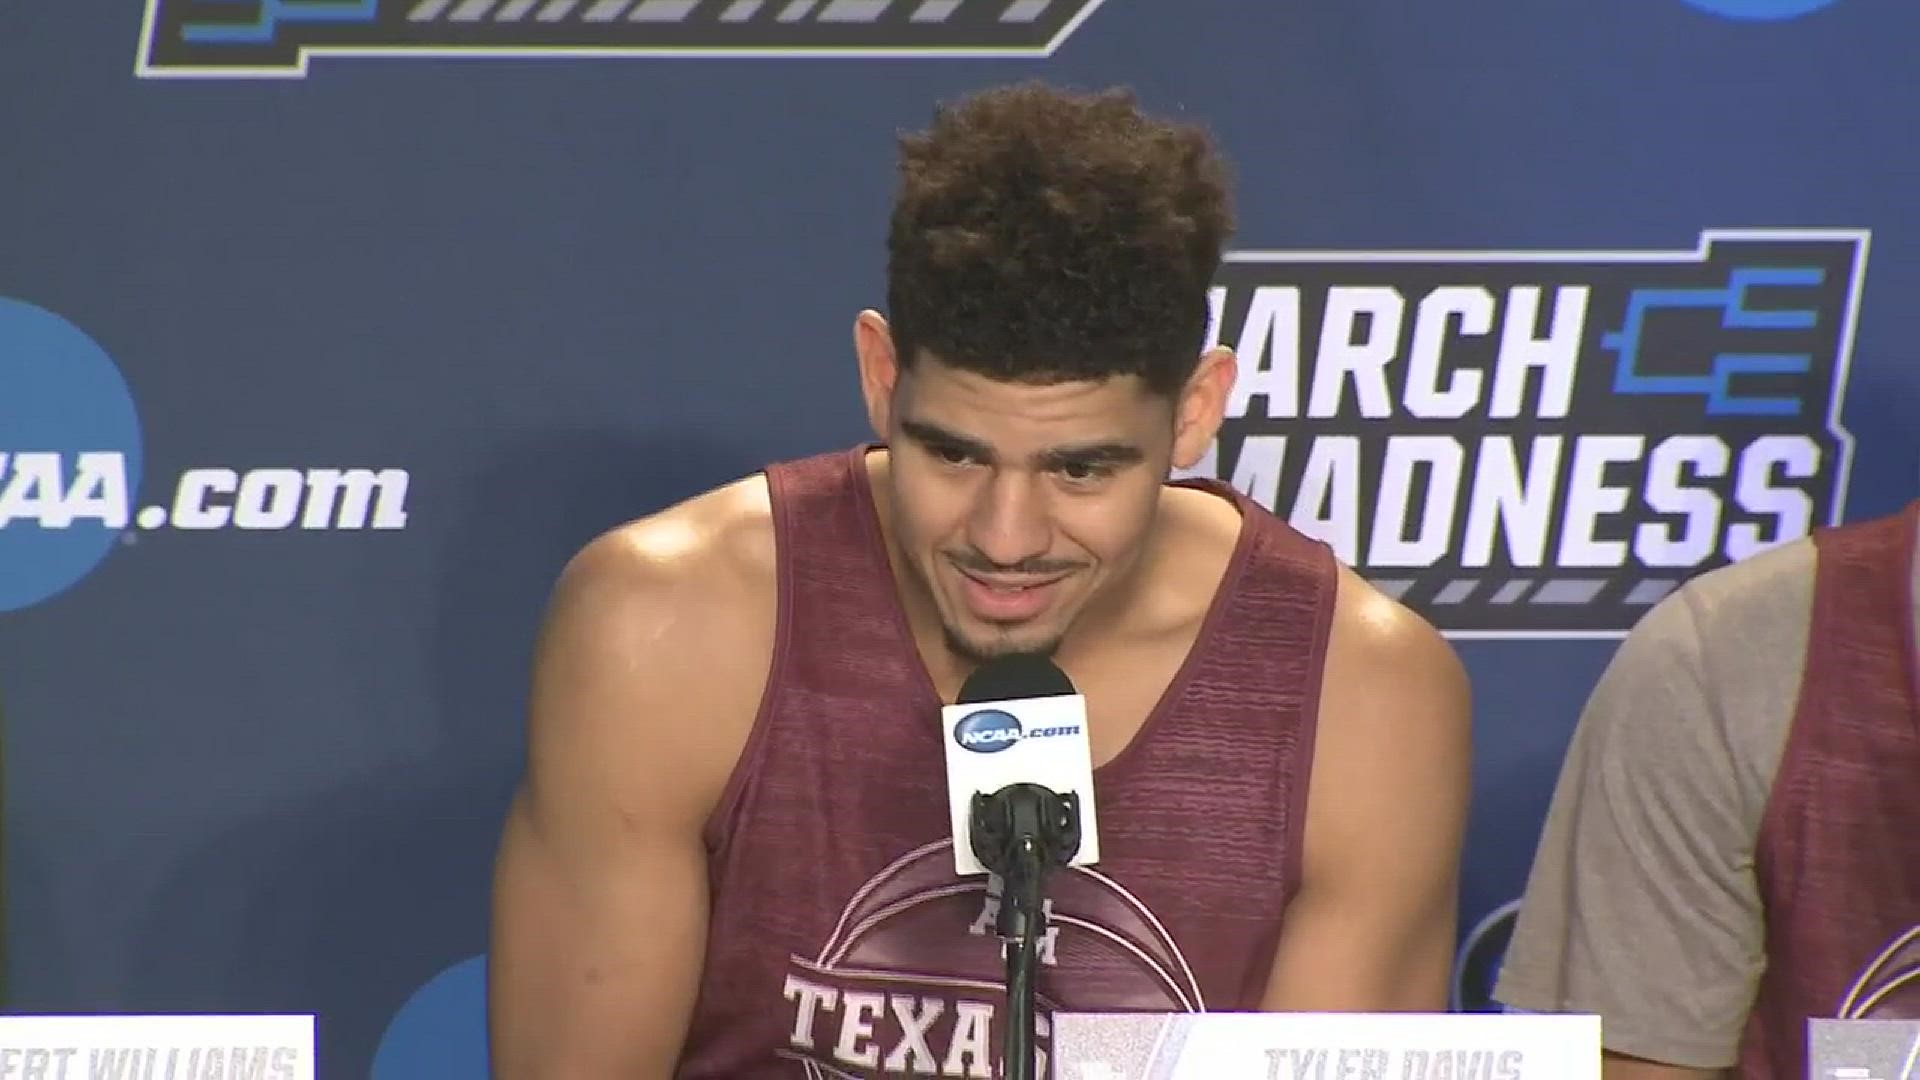 Texas A&M players talk about their 2nd round match-up with North Carolina in the NCAA Tournament.